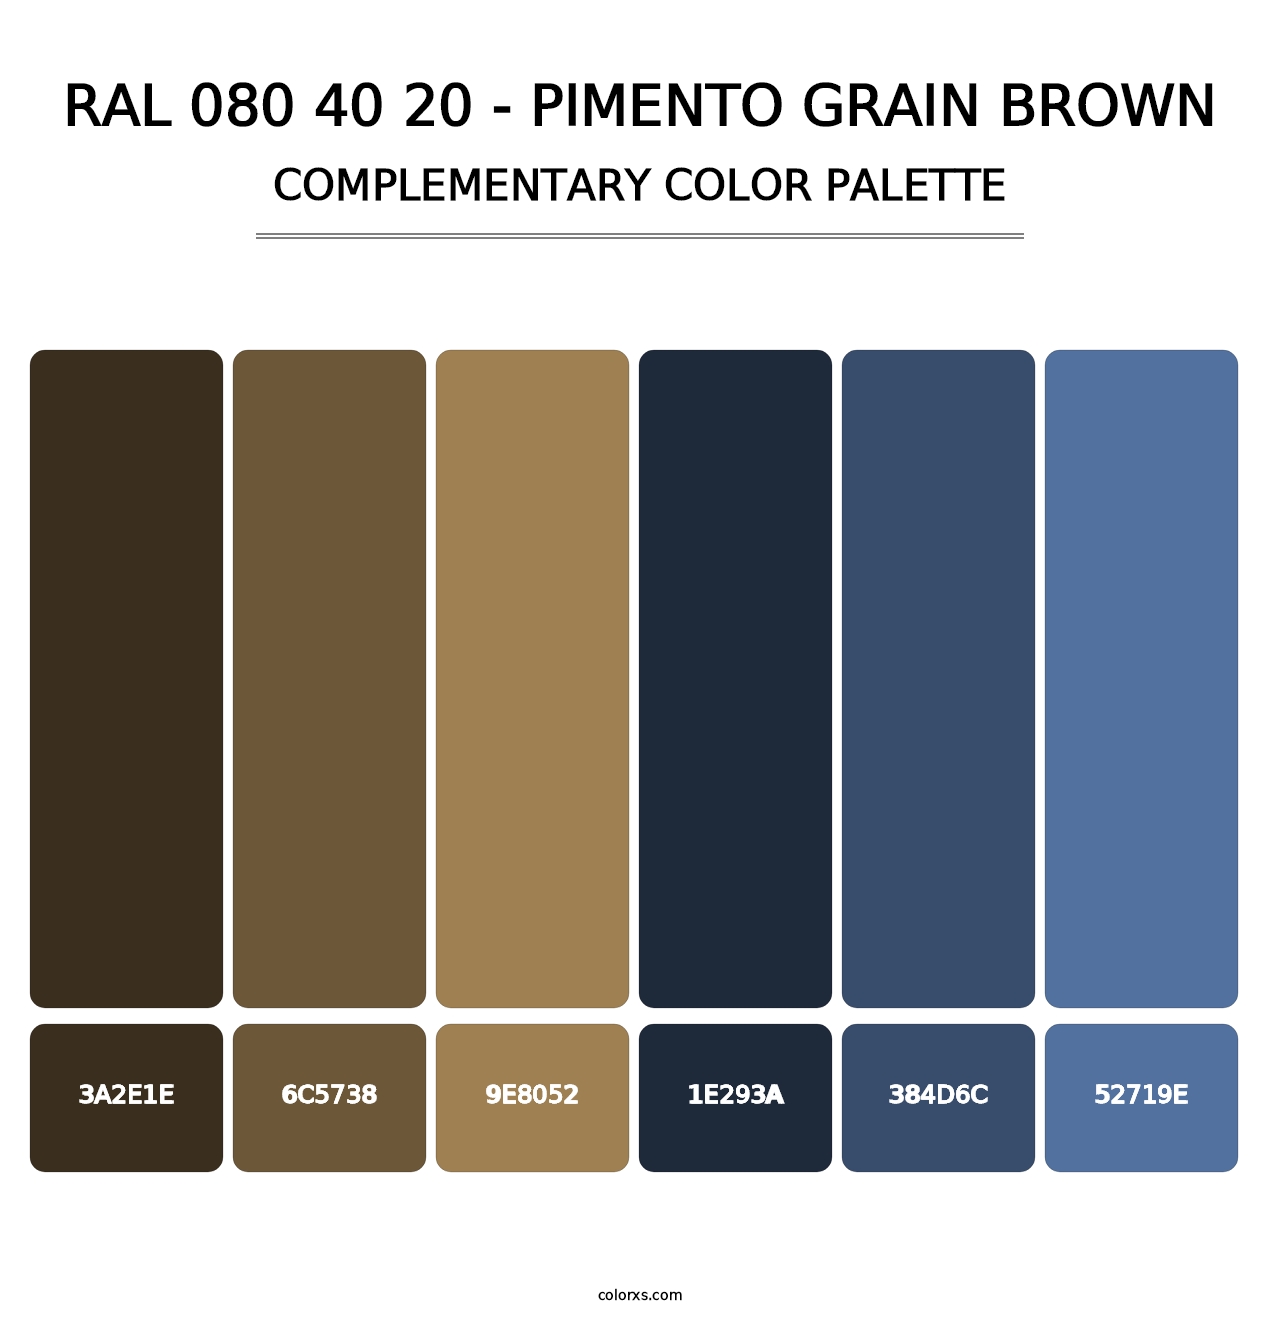 RAL 080 40 20 - Pimento Grain Brown - Complementary Color Palette